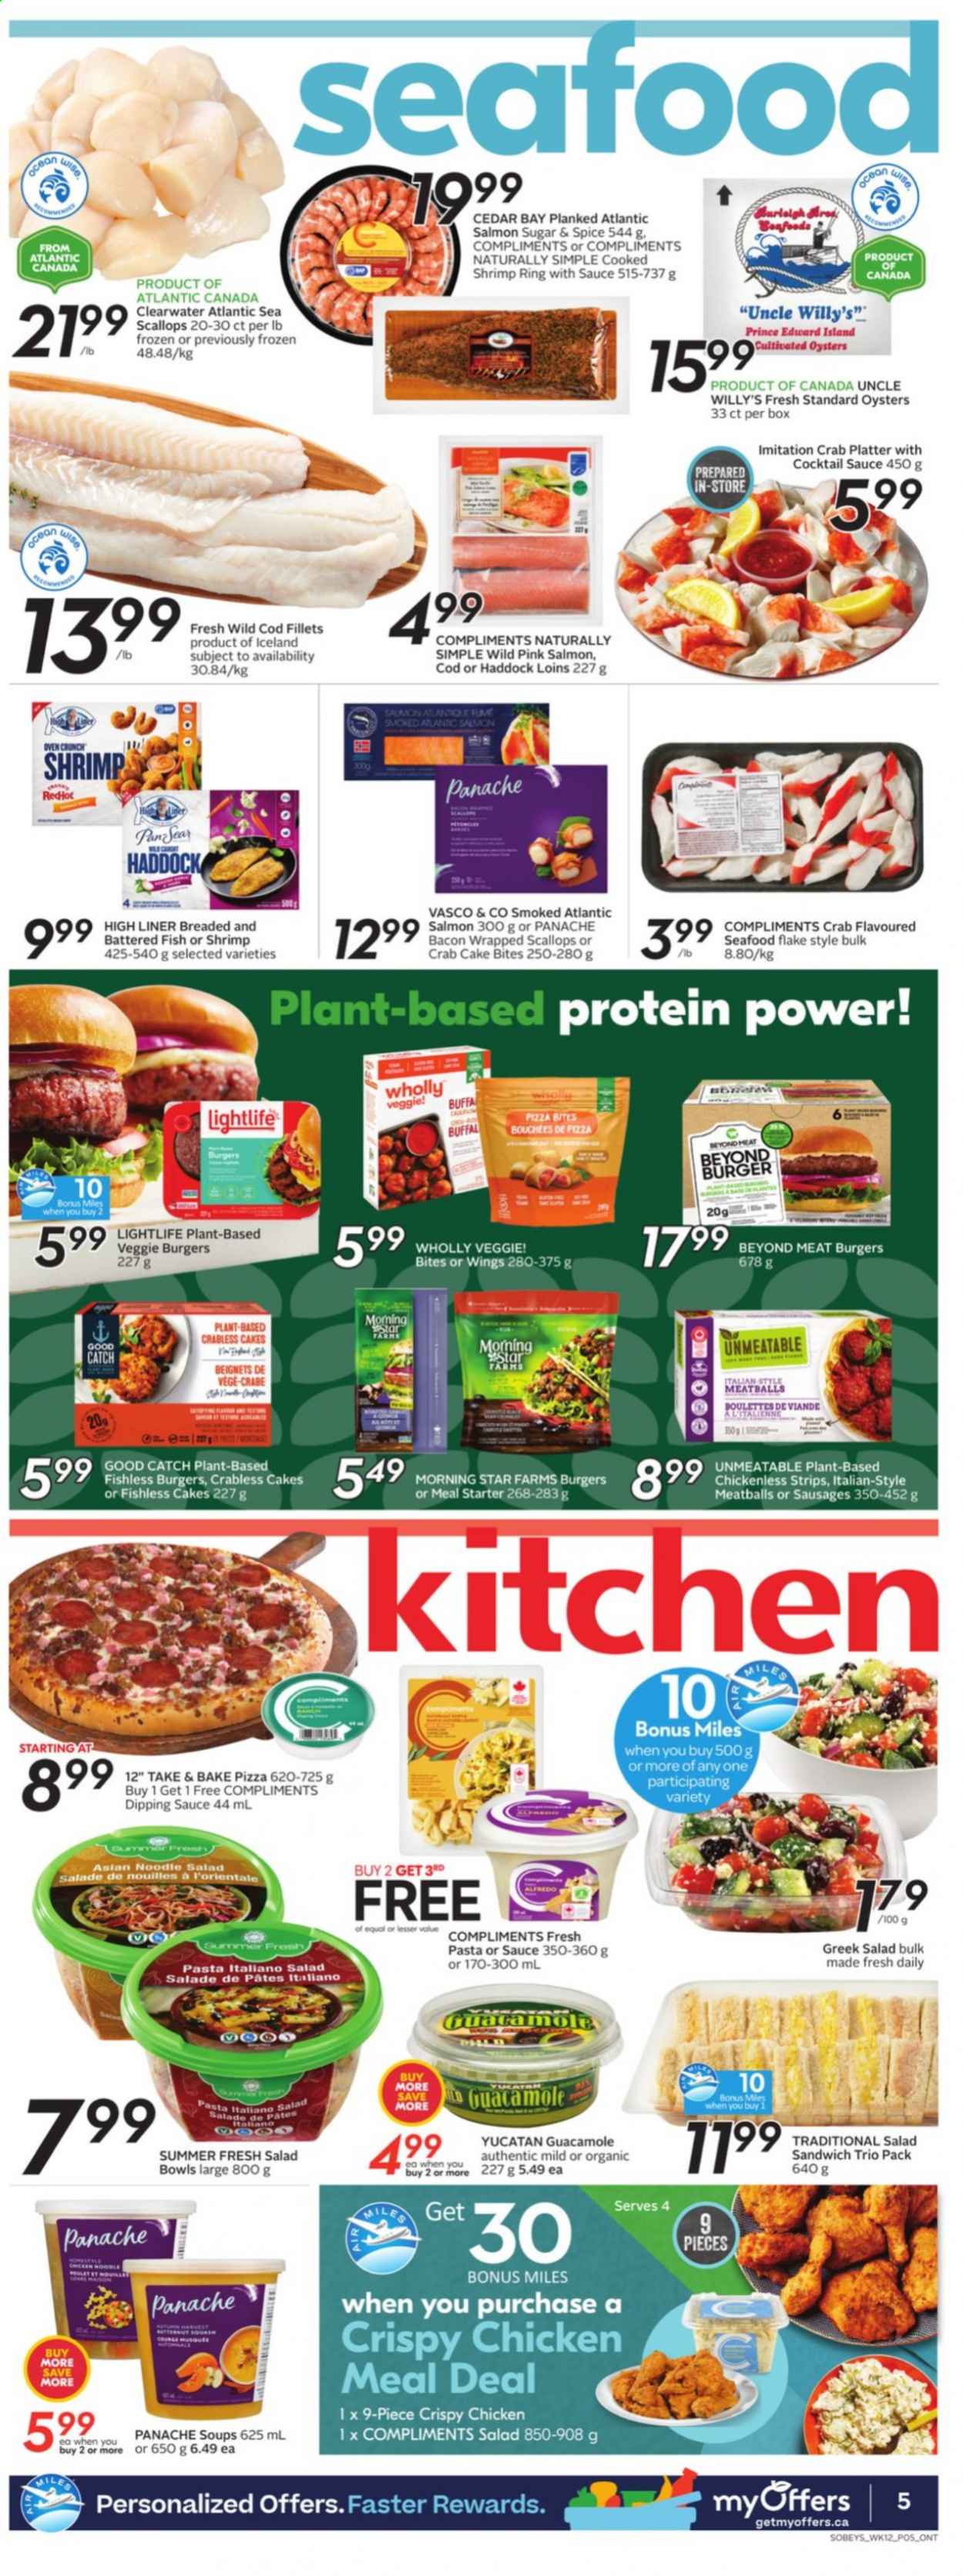 thumbnail - Sobeys Flyer - July 15, 2021 - July 21, 2021 - Sales products - bacon wrapped scallops, cod, salmon, scallops, haddock, oysters, seafood, crab, fish, shrimps, pizza, meatballs, sandwich, noodles, veggie burger, bacon, sausage, guacamole, strips, sugar, spice, cocktail sauce. Page 5.